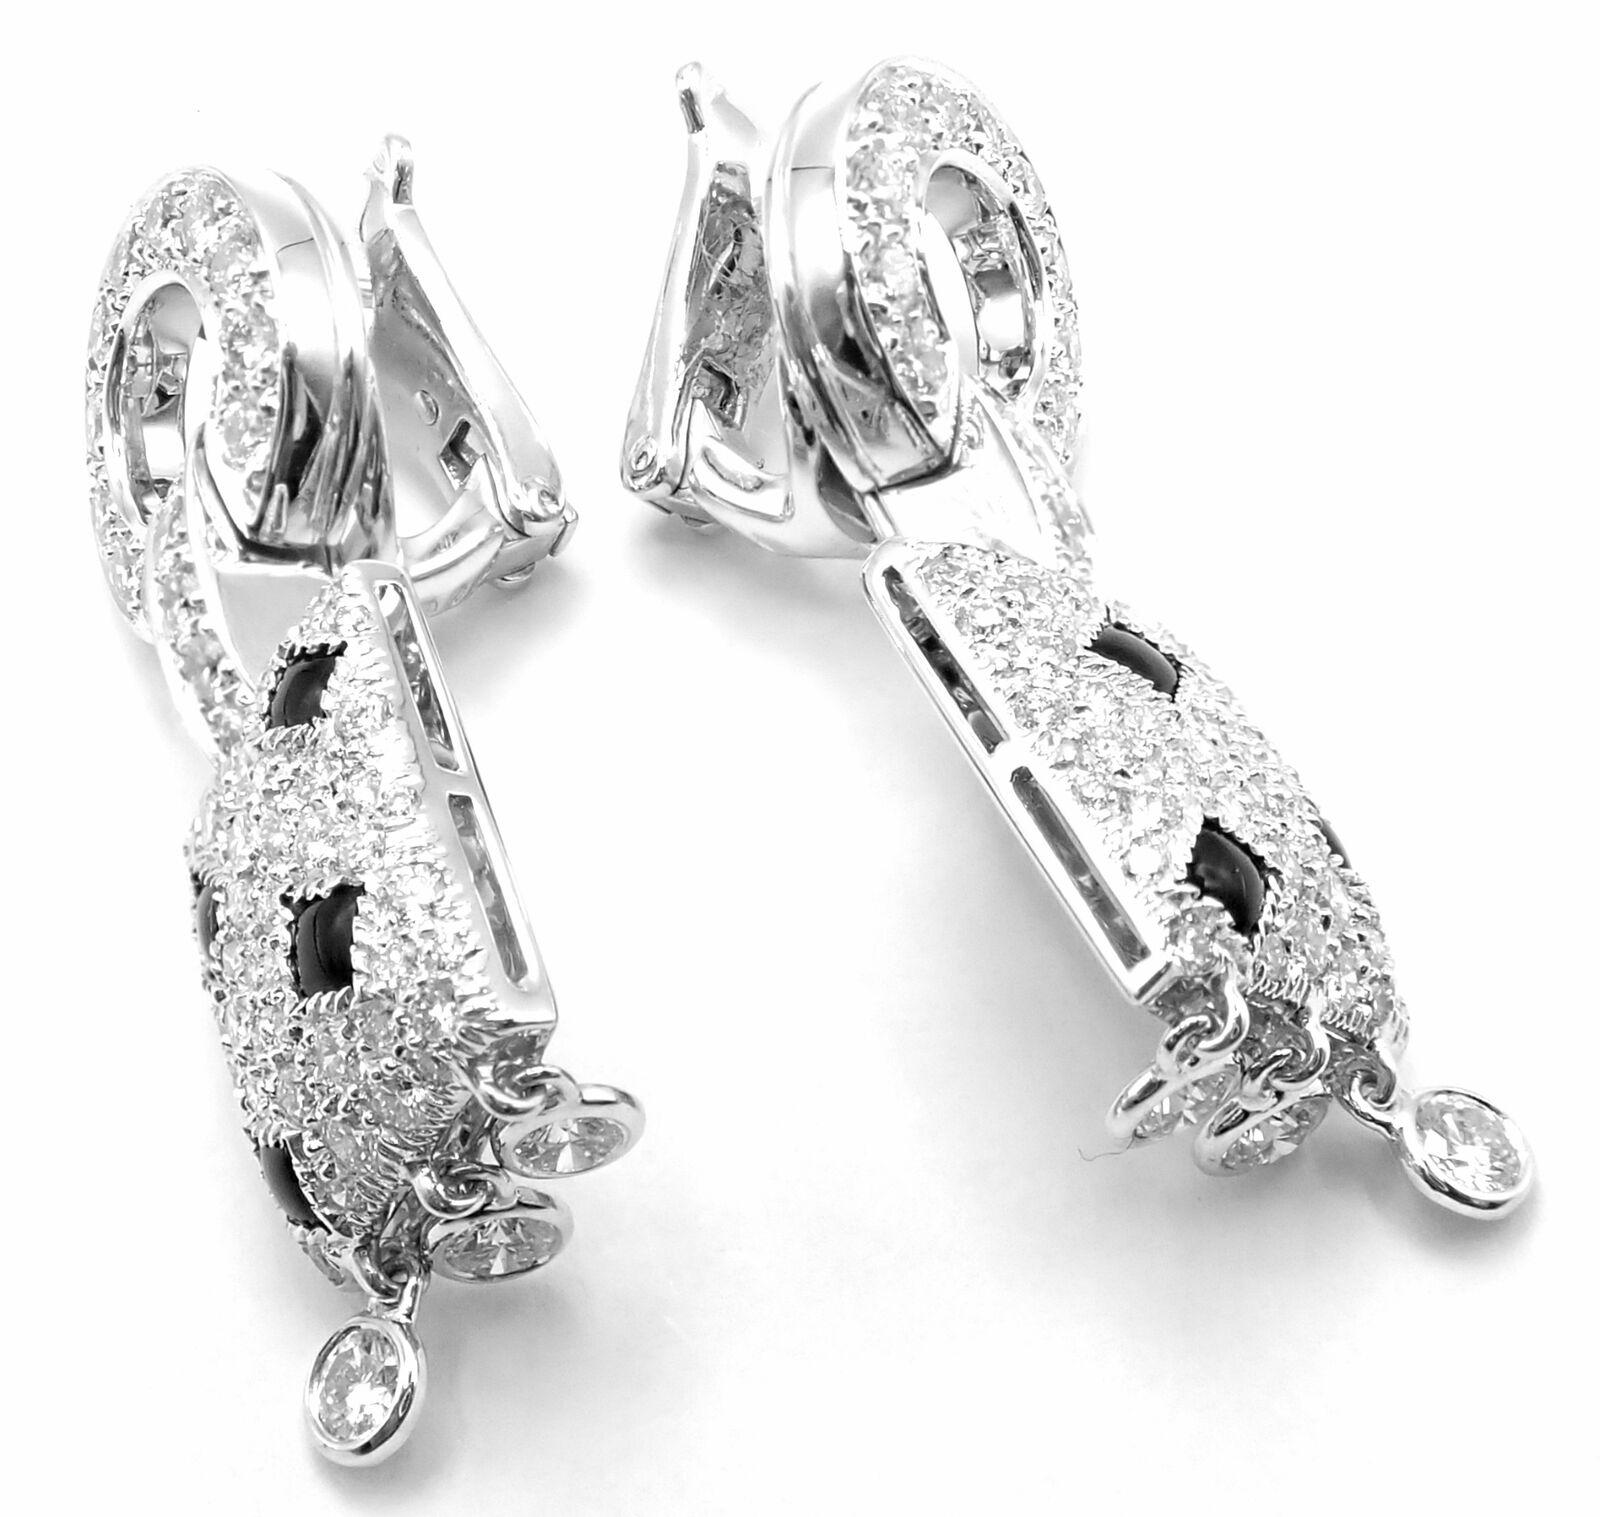 18k White Gold Panthere Diamond And Black Onyx Earrings by Cartier. 
With Round brilliant cut diamonds total weight approx .98ct.
Diamonds VVS1 clarity, E color and black onyx
These earrings come with service paper from Cartier From NYC and Cartier